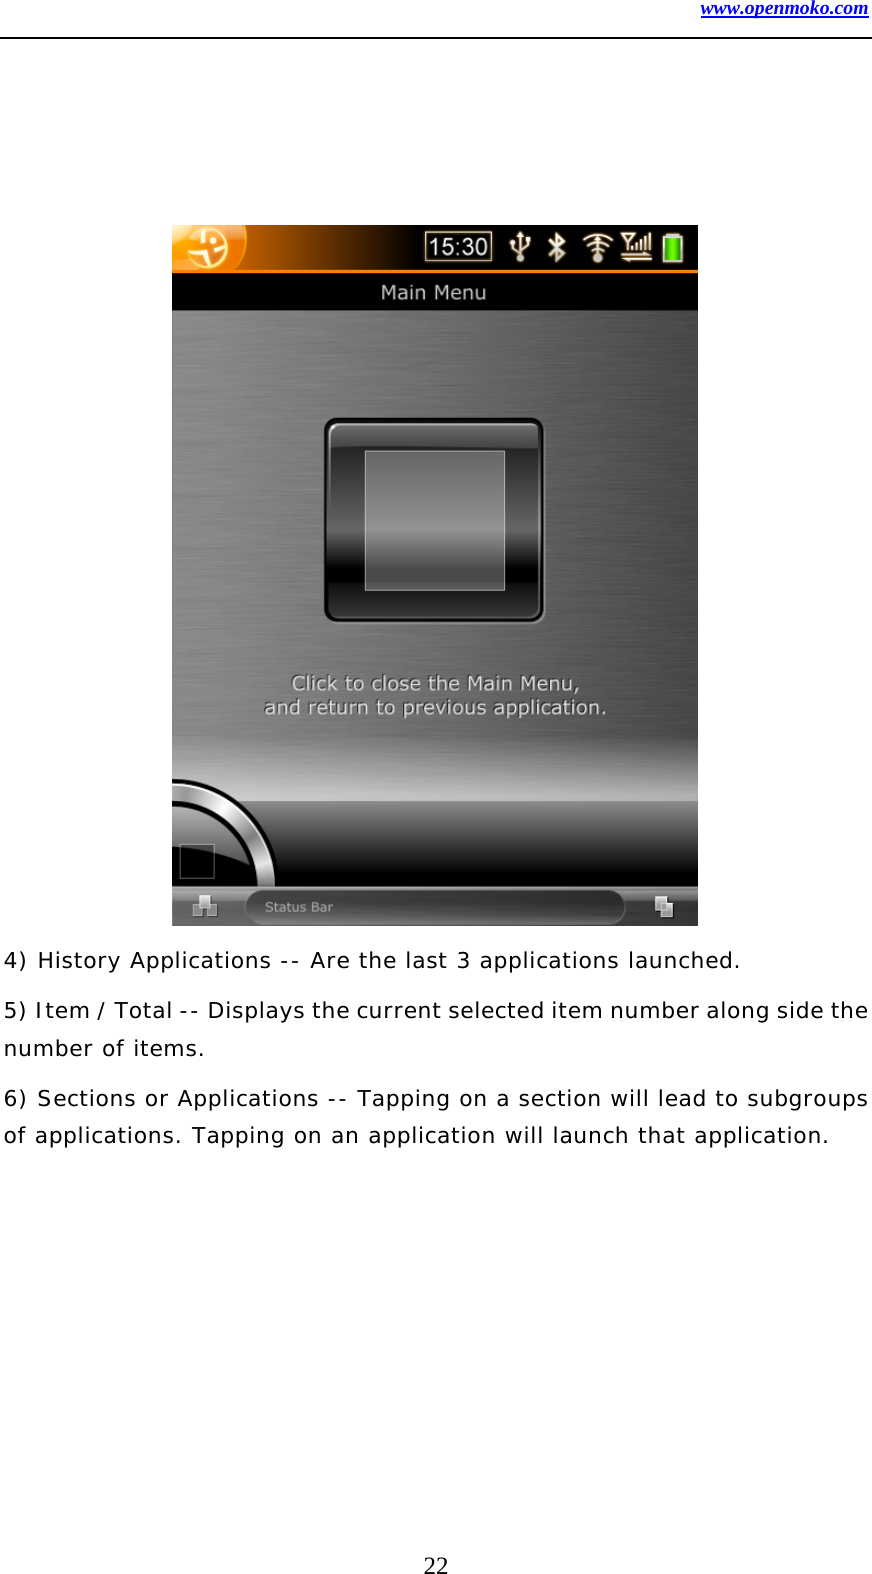 www.openmoko.com 22                   4) History Applications -- Are the last 3 applications launched.  5) Item / Total -- Displays the current selected item number along side the number of items.  6) Sections or Applications -- Tapping on a section will lead to subgroups of applications. Tapping on an application will launch that application. 